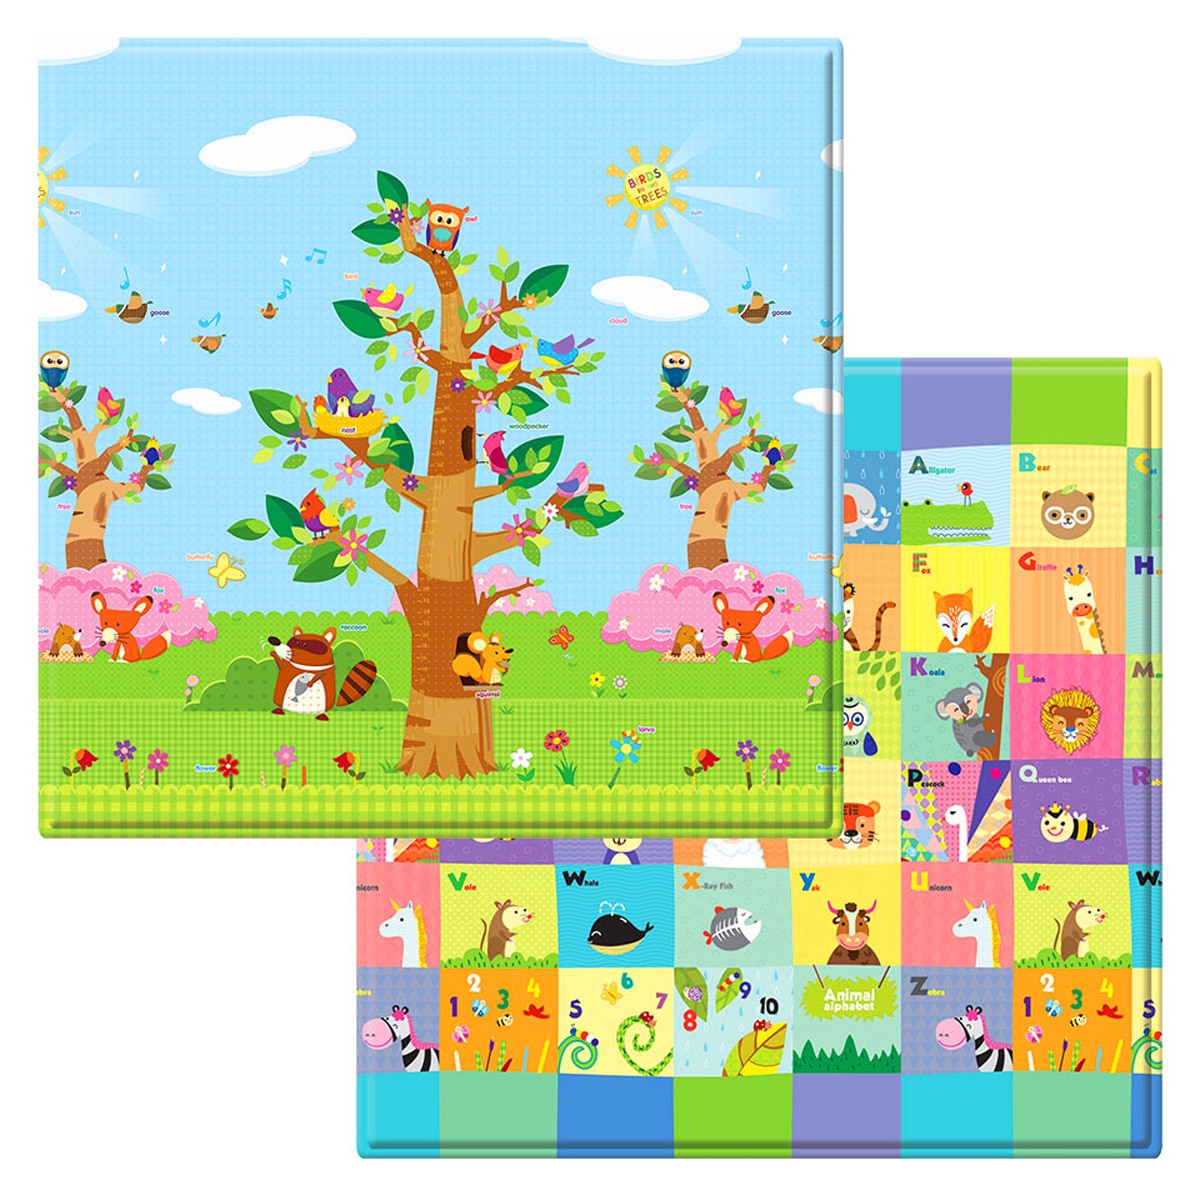 BabyCare Kids' Play Mat Square